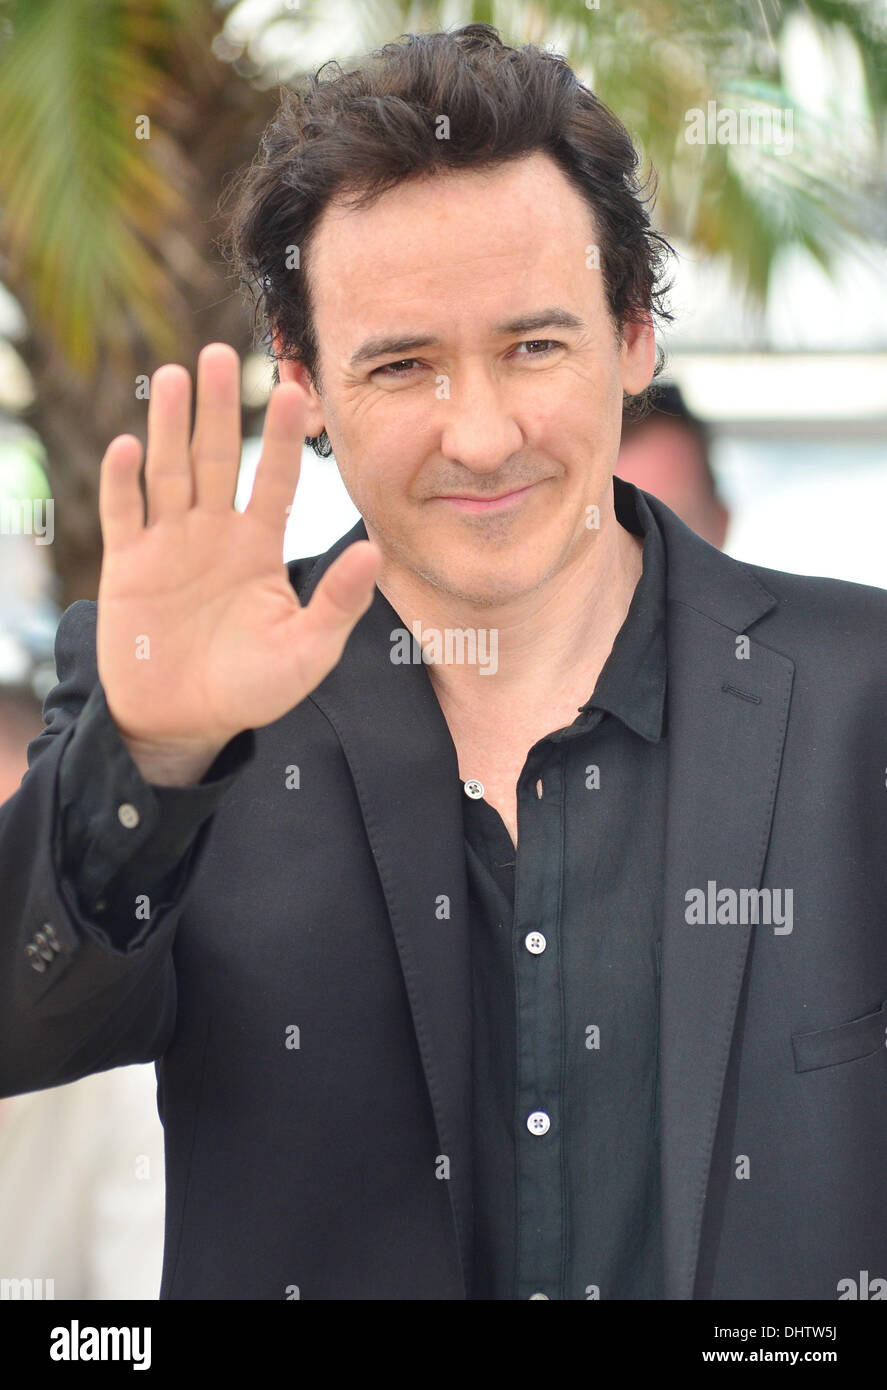 John Cusack 'The Paperboy' photocall during the 65th Cannes Film Festival Cannes, France - 24.05.12 Stock Photo